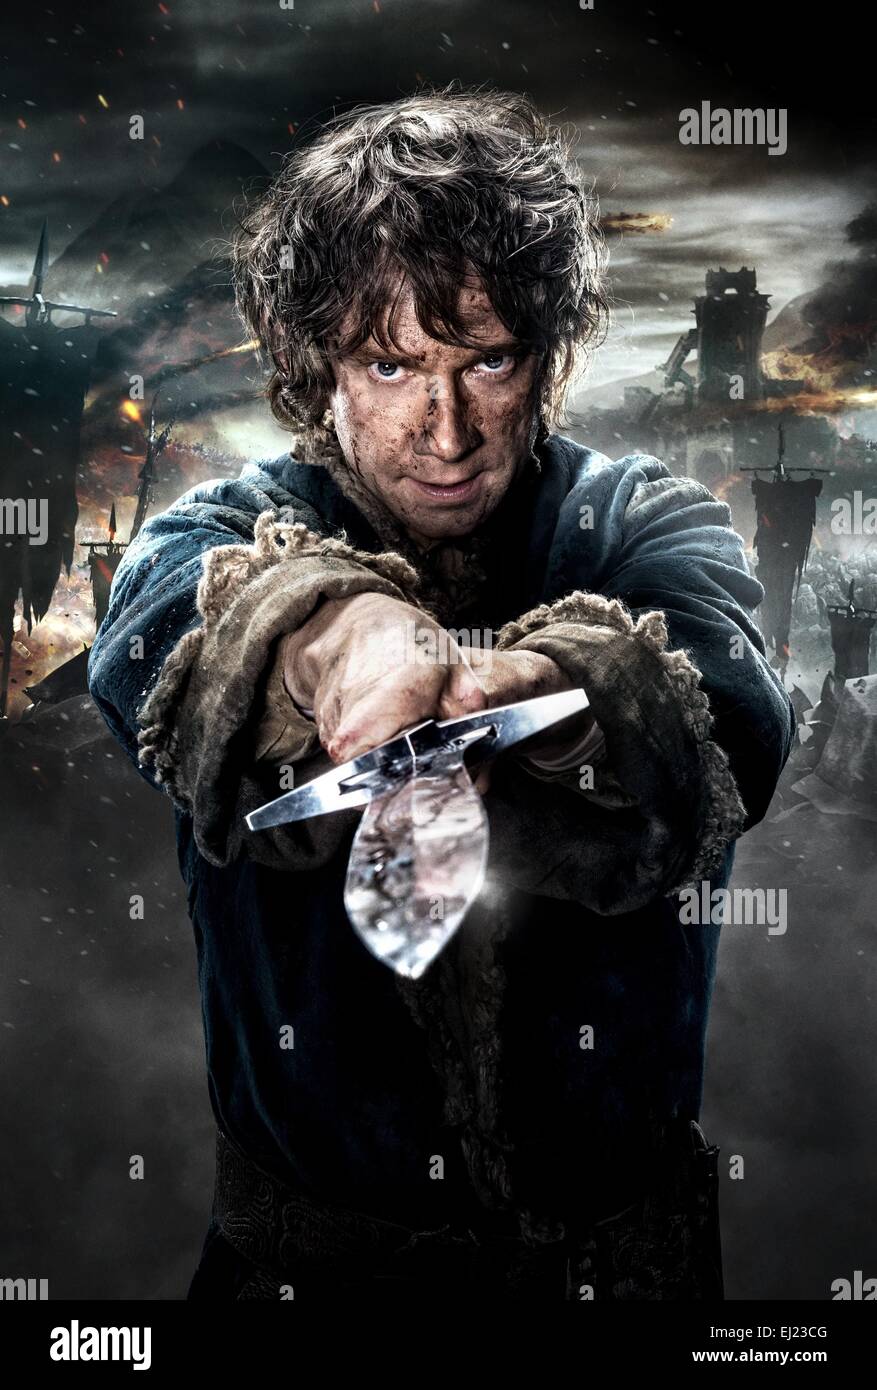 The Hobbit : The Battle of the Five Armies Year : 2014 New Zealand / USA Director : Peter Jackson Martin Freeman Movie poster (textless) Stock Photo